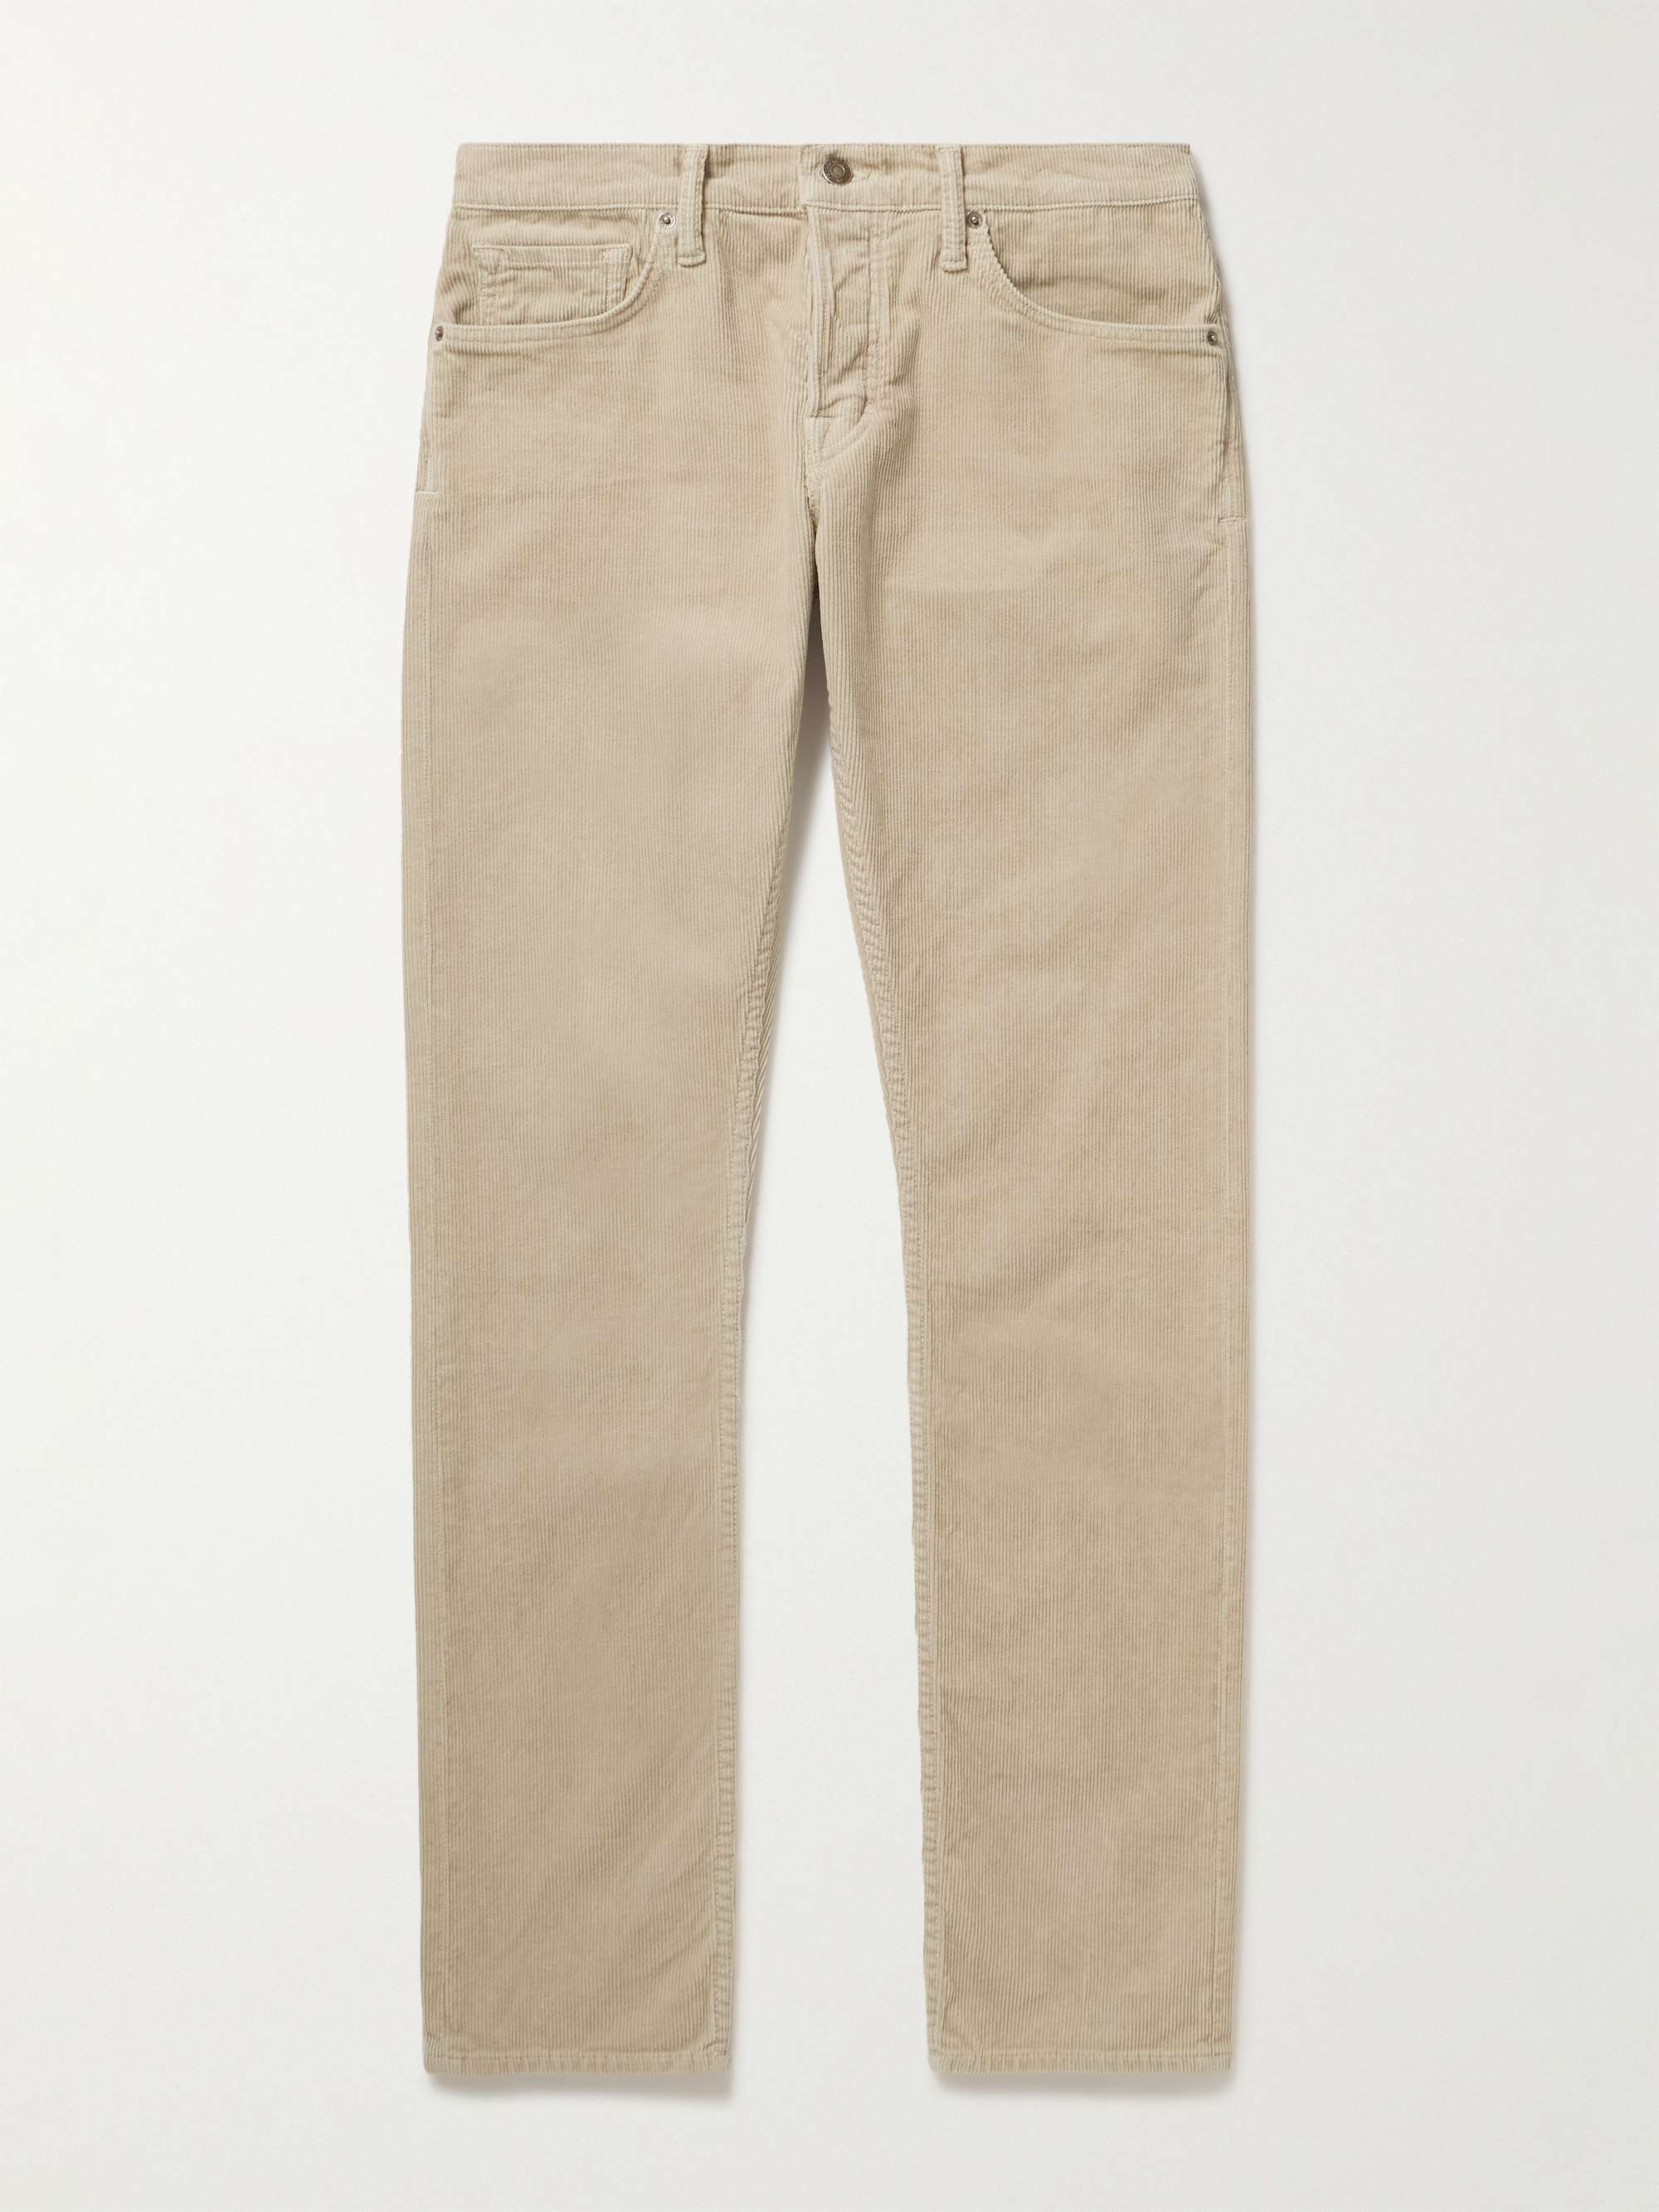 TOM FORD 12 Waves Cord Slim-Fit Cotton-Blend Corduroy Trousers